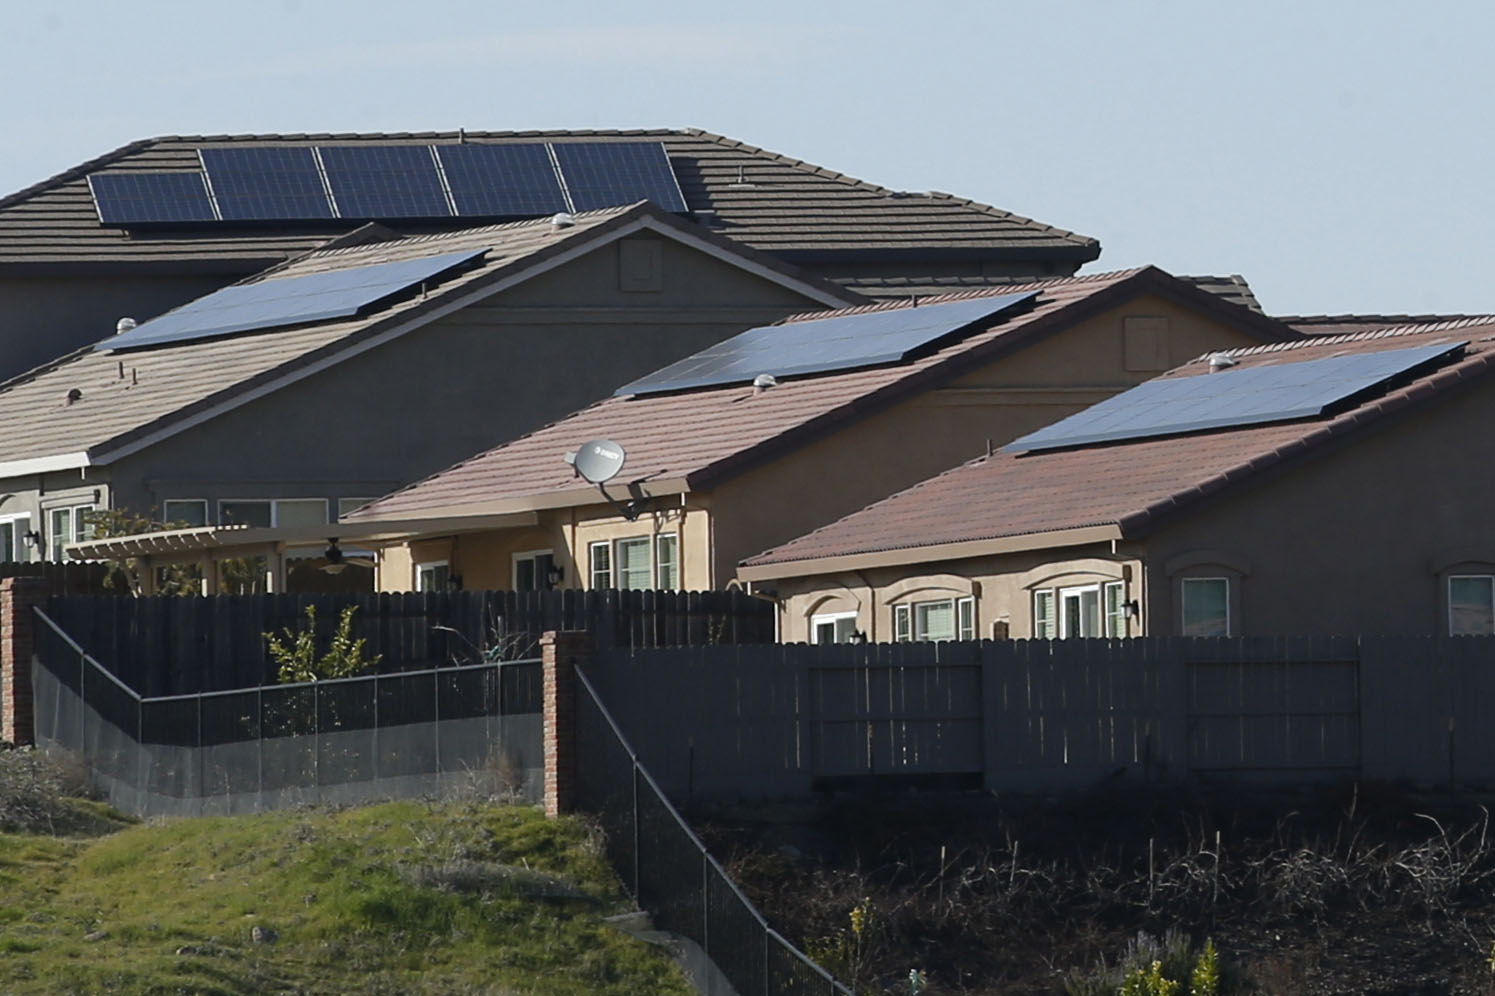 California’s rooftop solar program collides with equity concerns